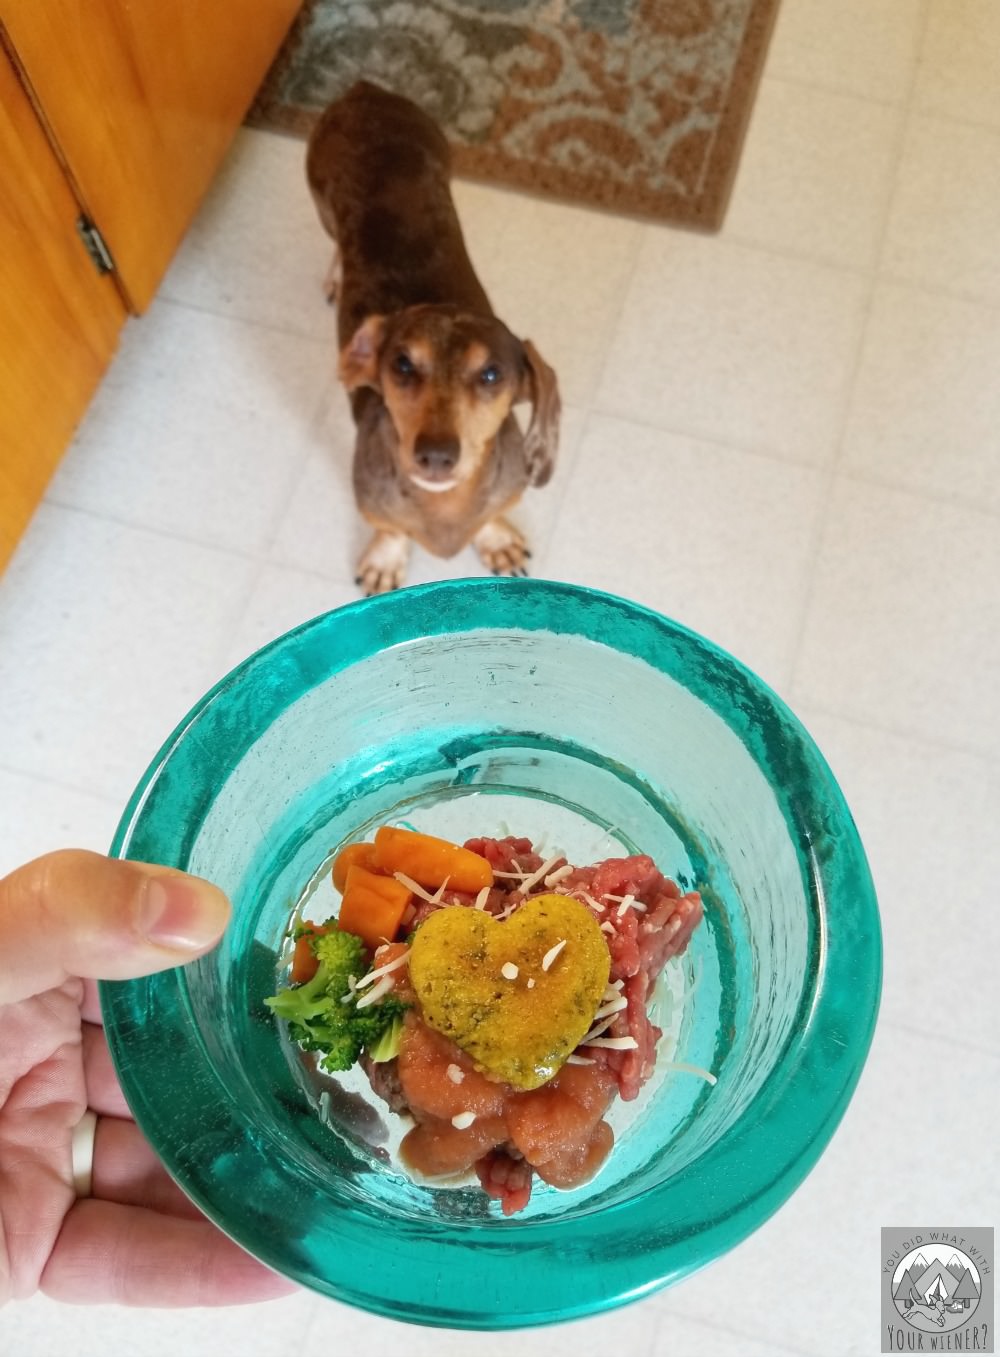 Dog Getting a small CBD Cookie from HempMy Pet in her dinner bowl